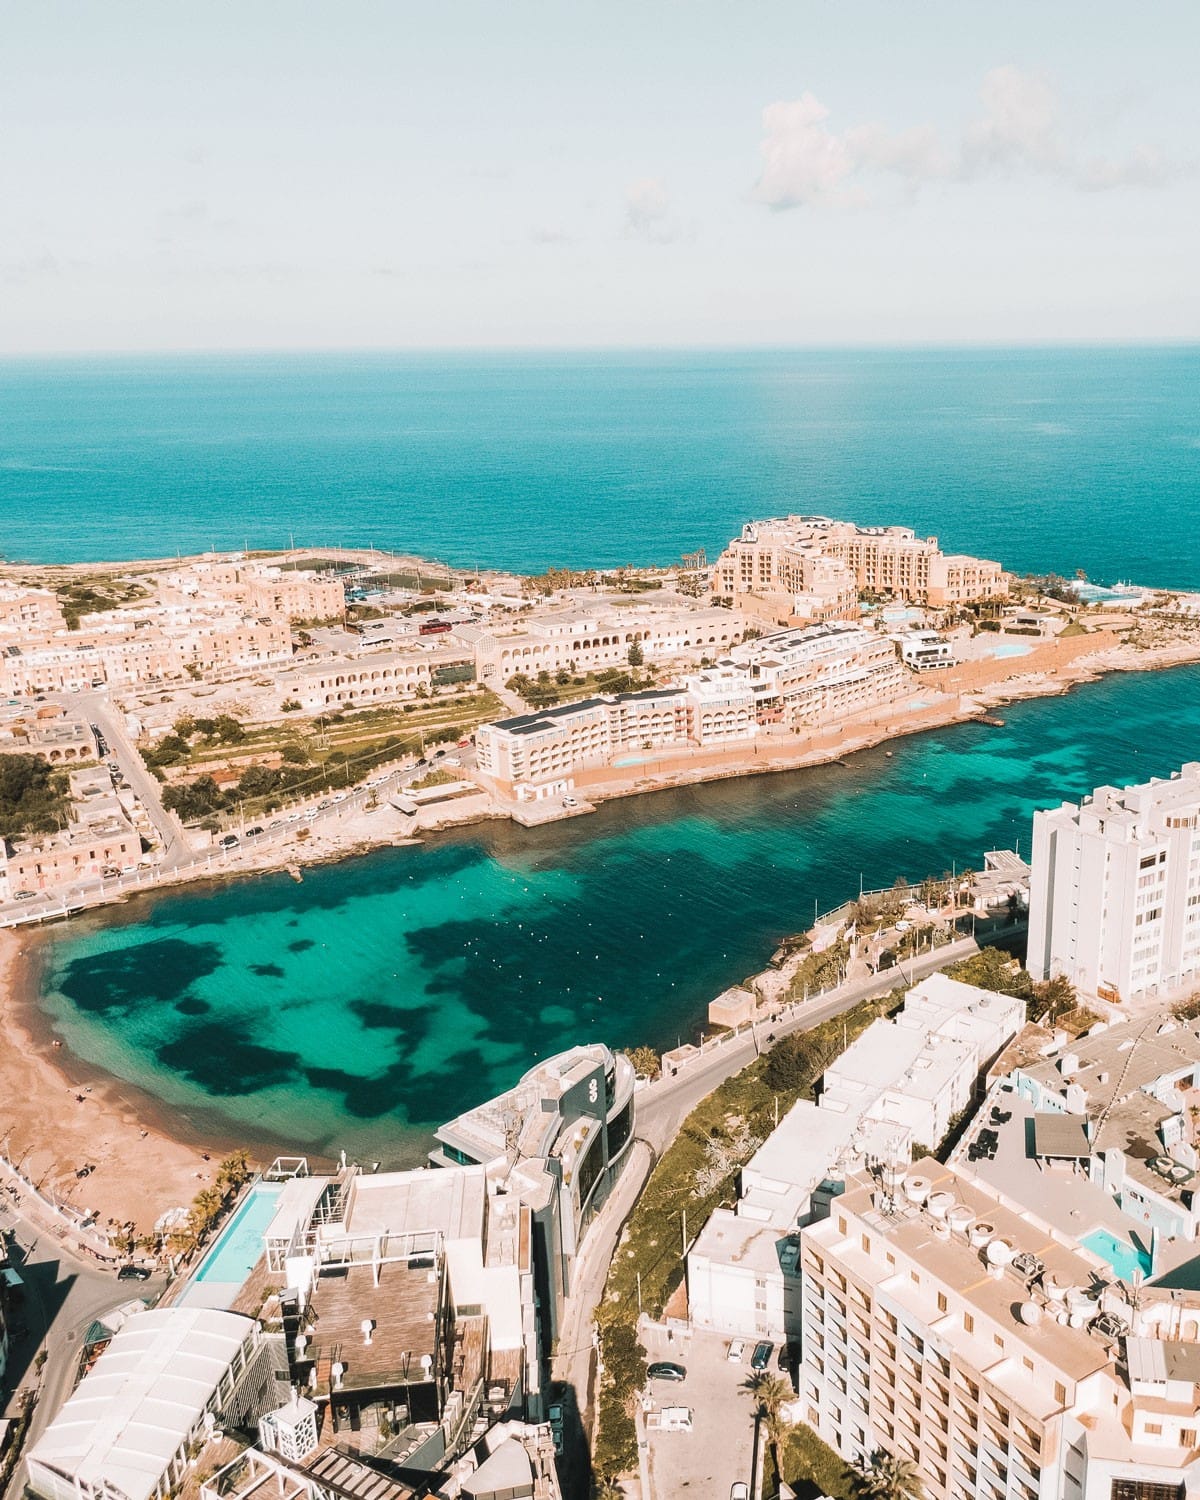 Aerial view of St. Julian's in Malta showcasing the clear turquoise waters of the bay, the surrounding Mediterranean architecture, and the urban landscape, with the caption highlighting it as the best place to stay.